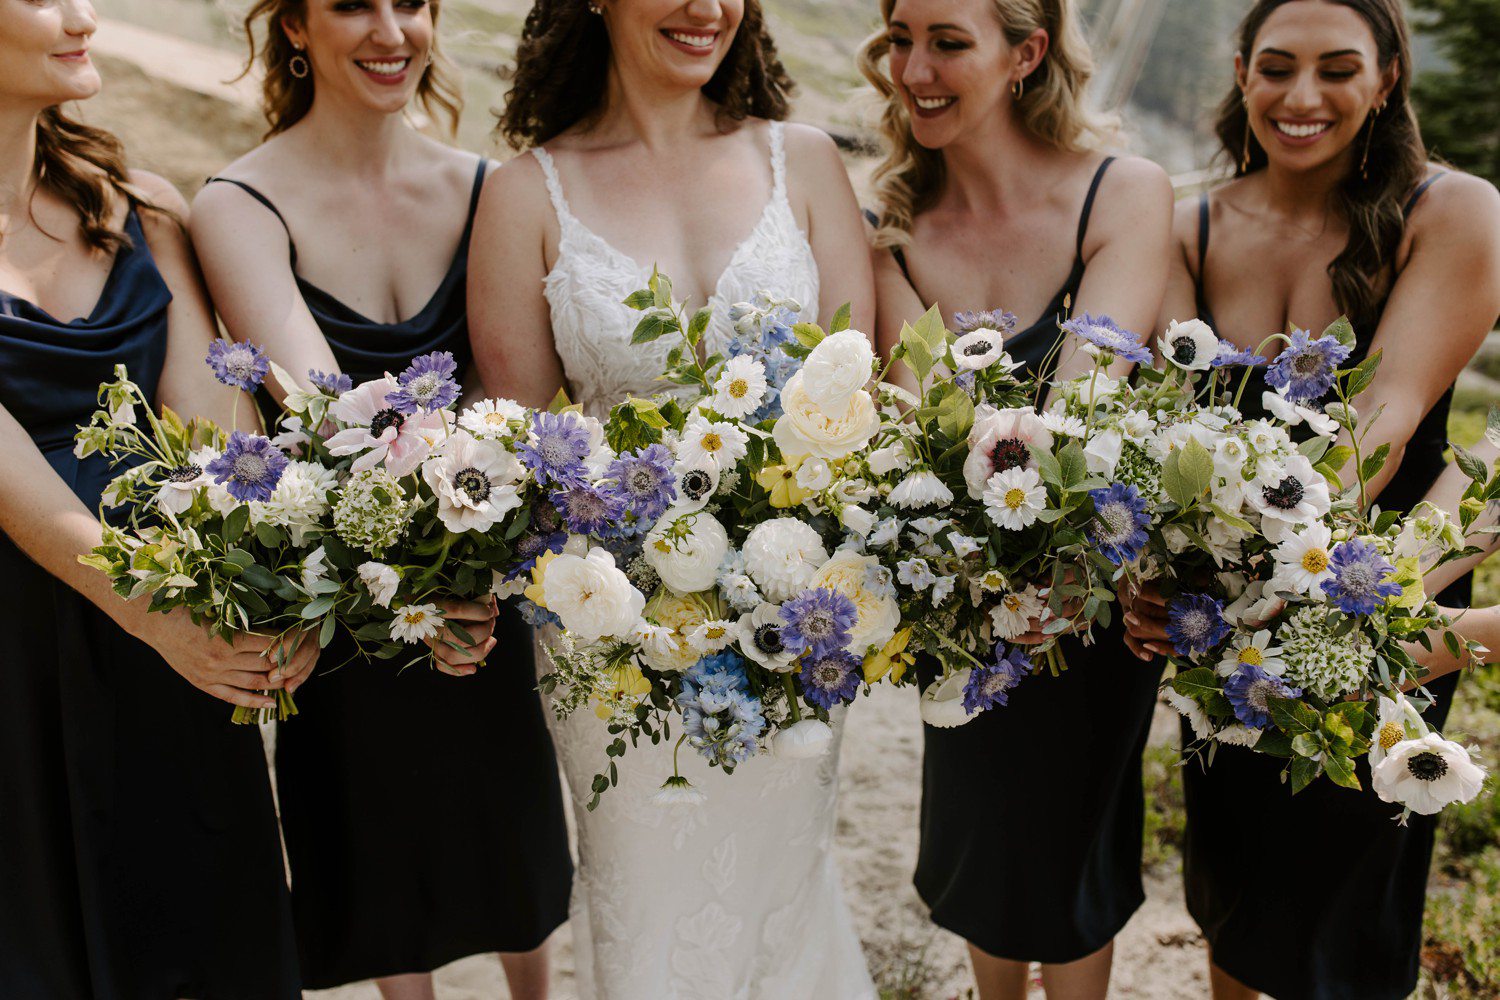 Bridesmaids with summer wedding bouquets